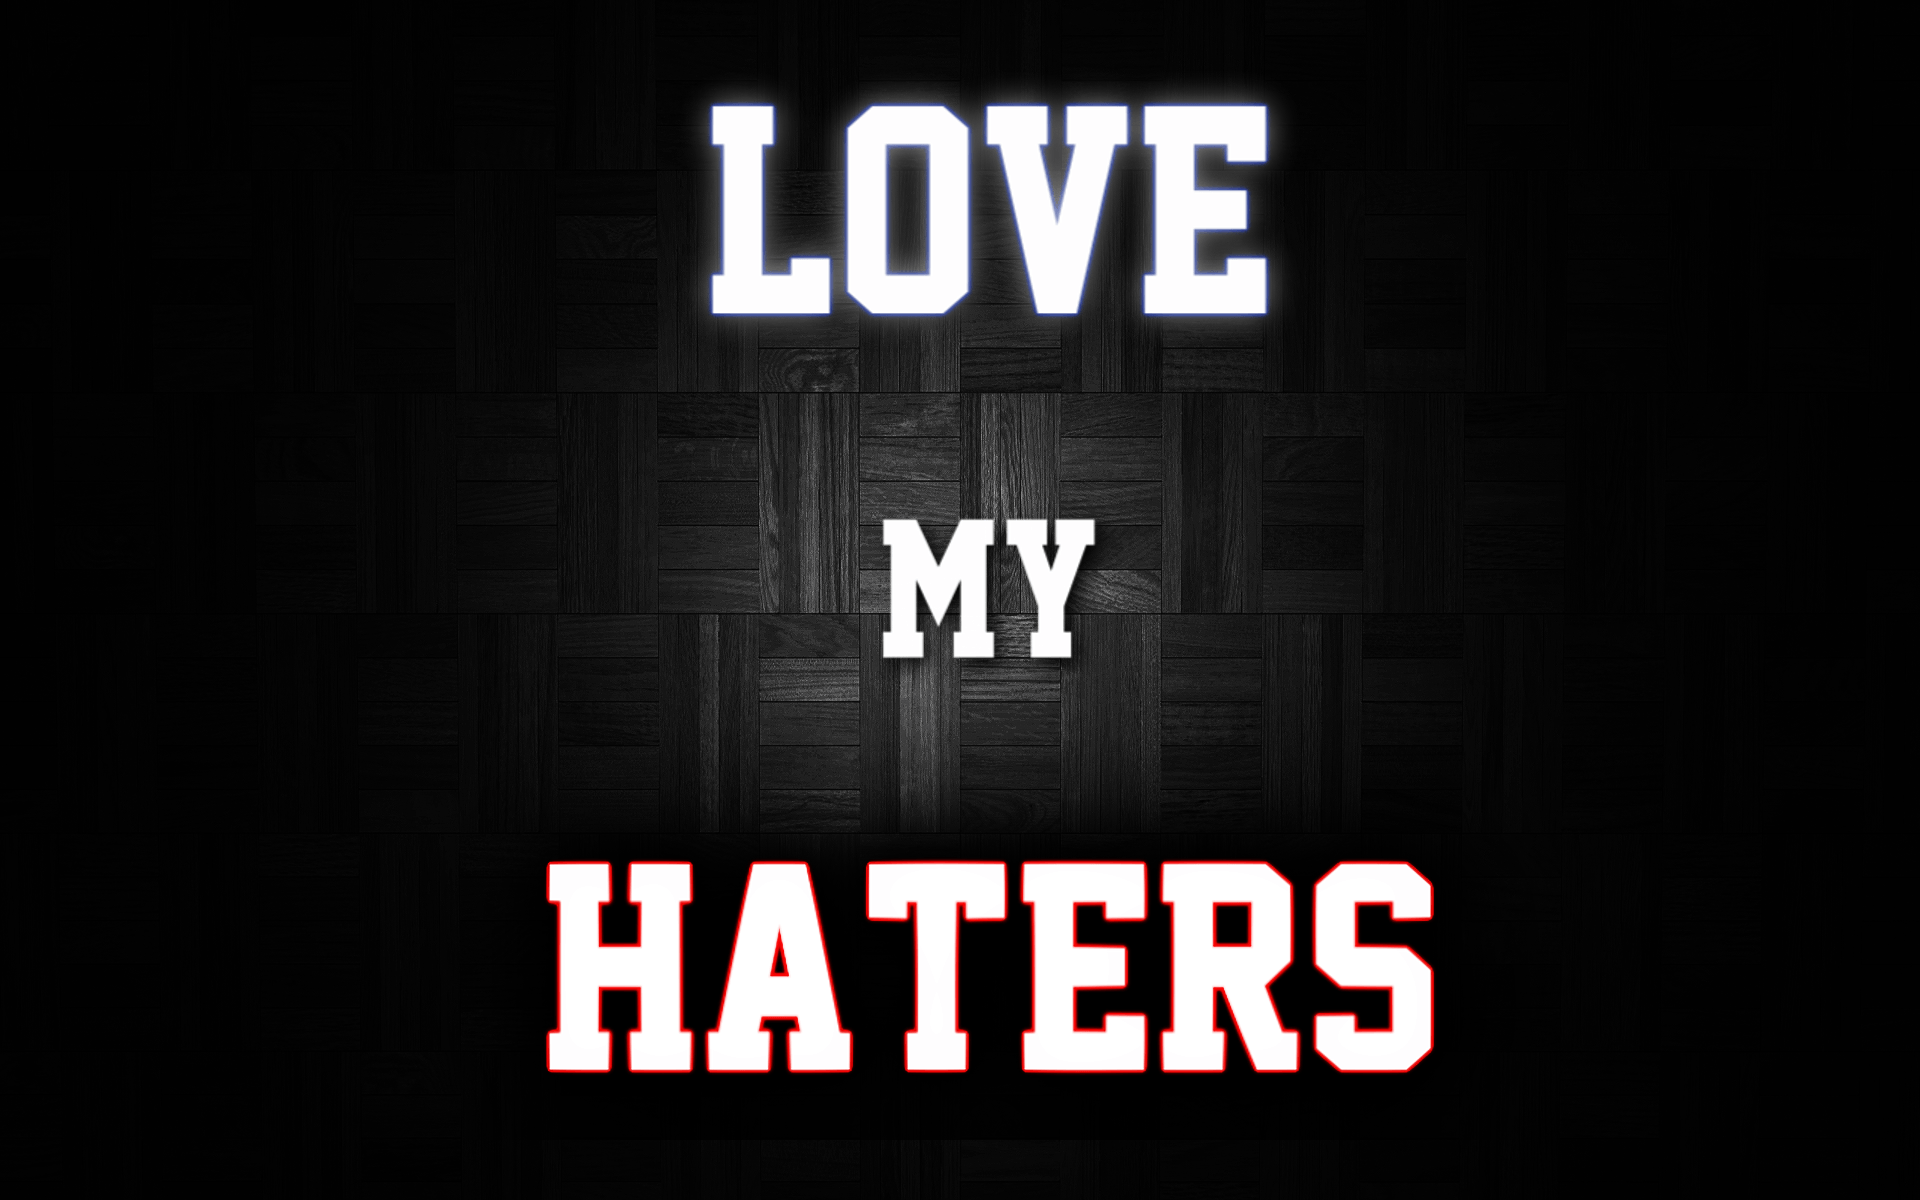 I Love My Haters Background